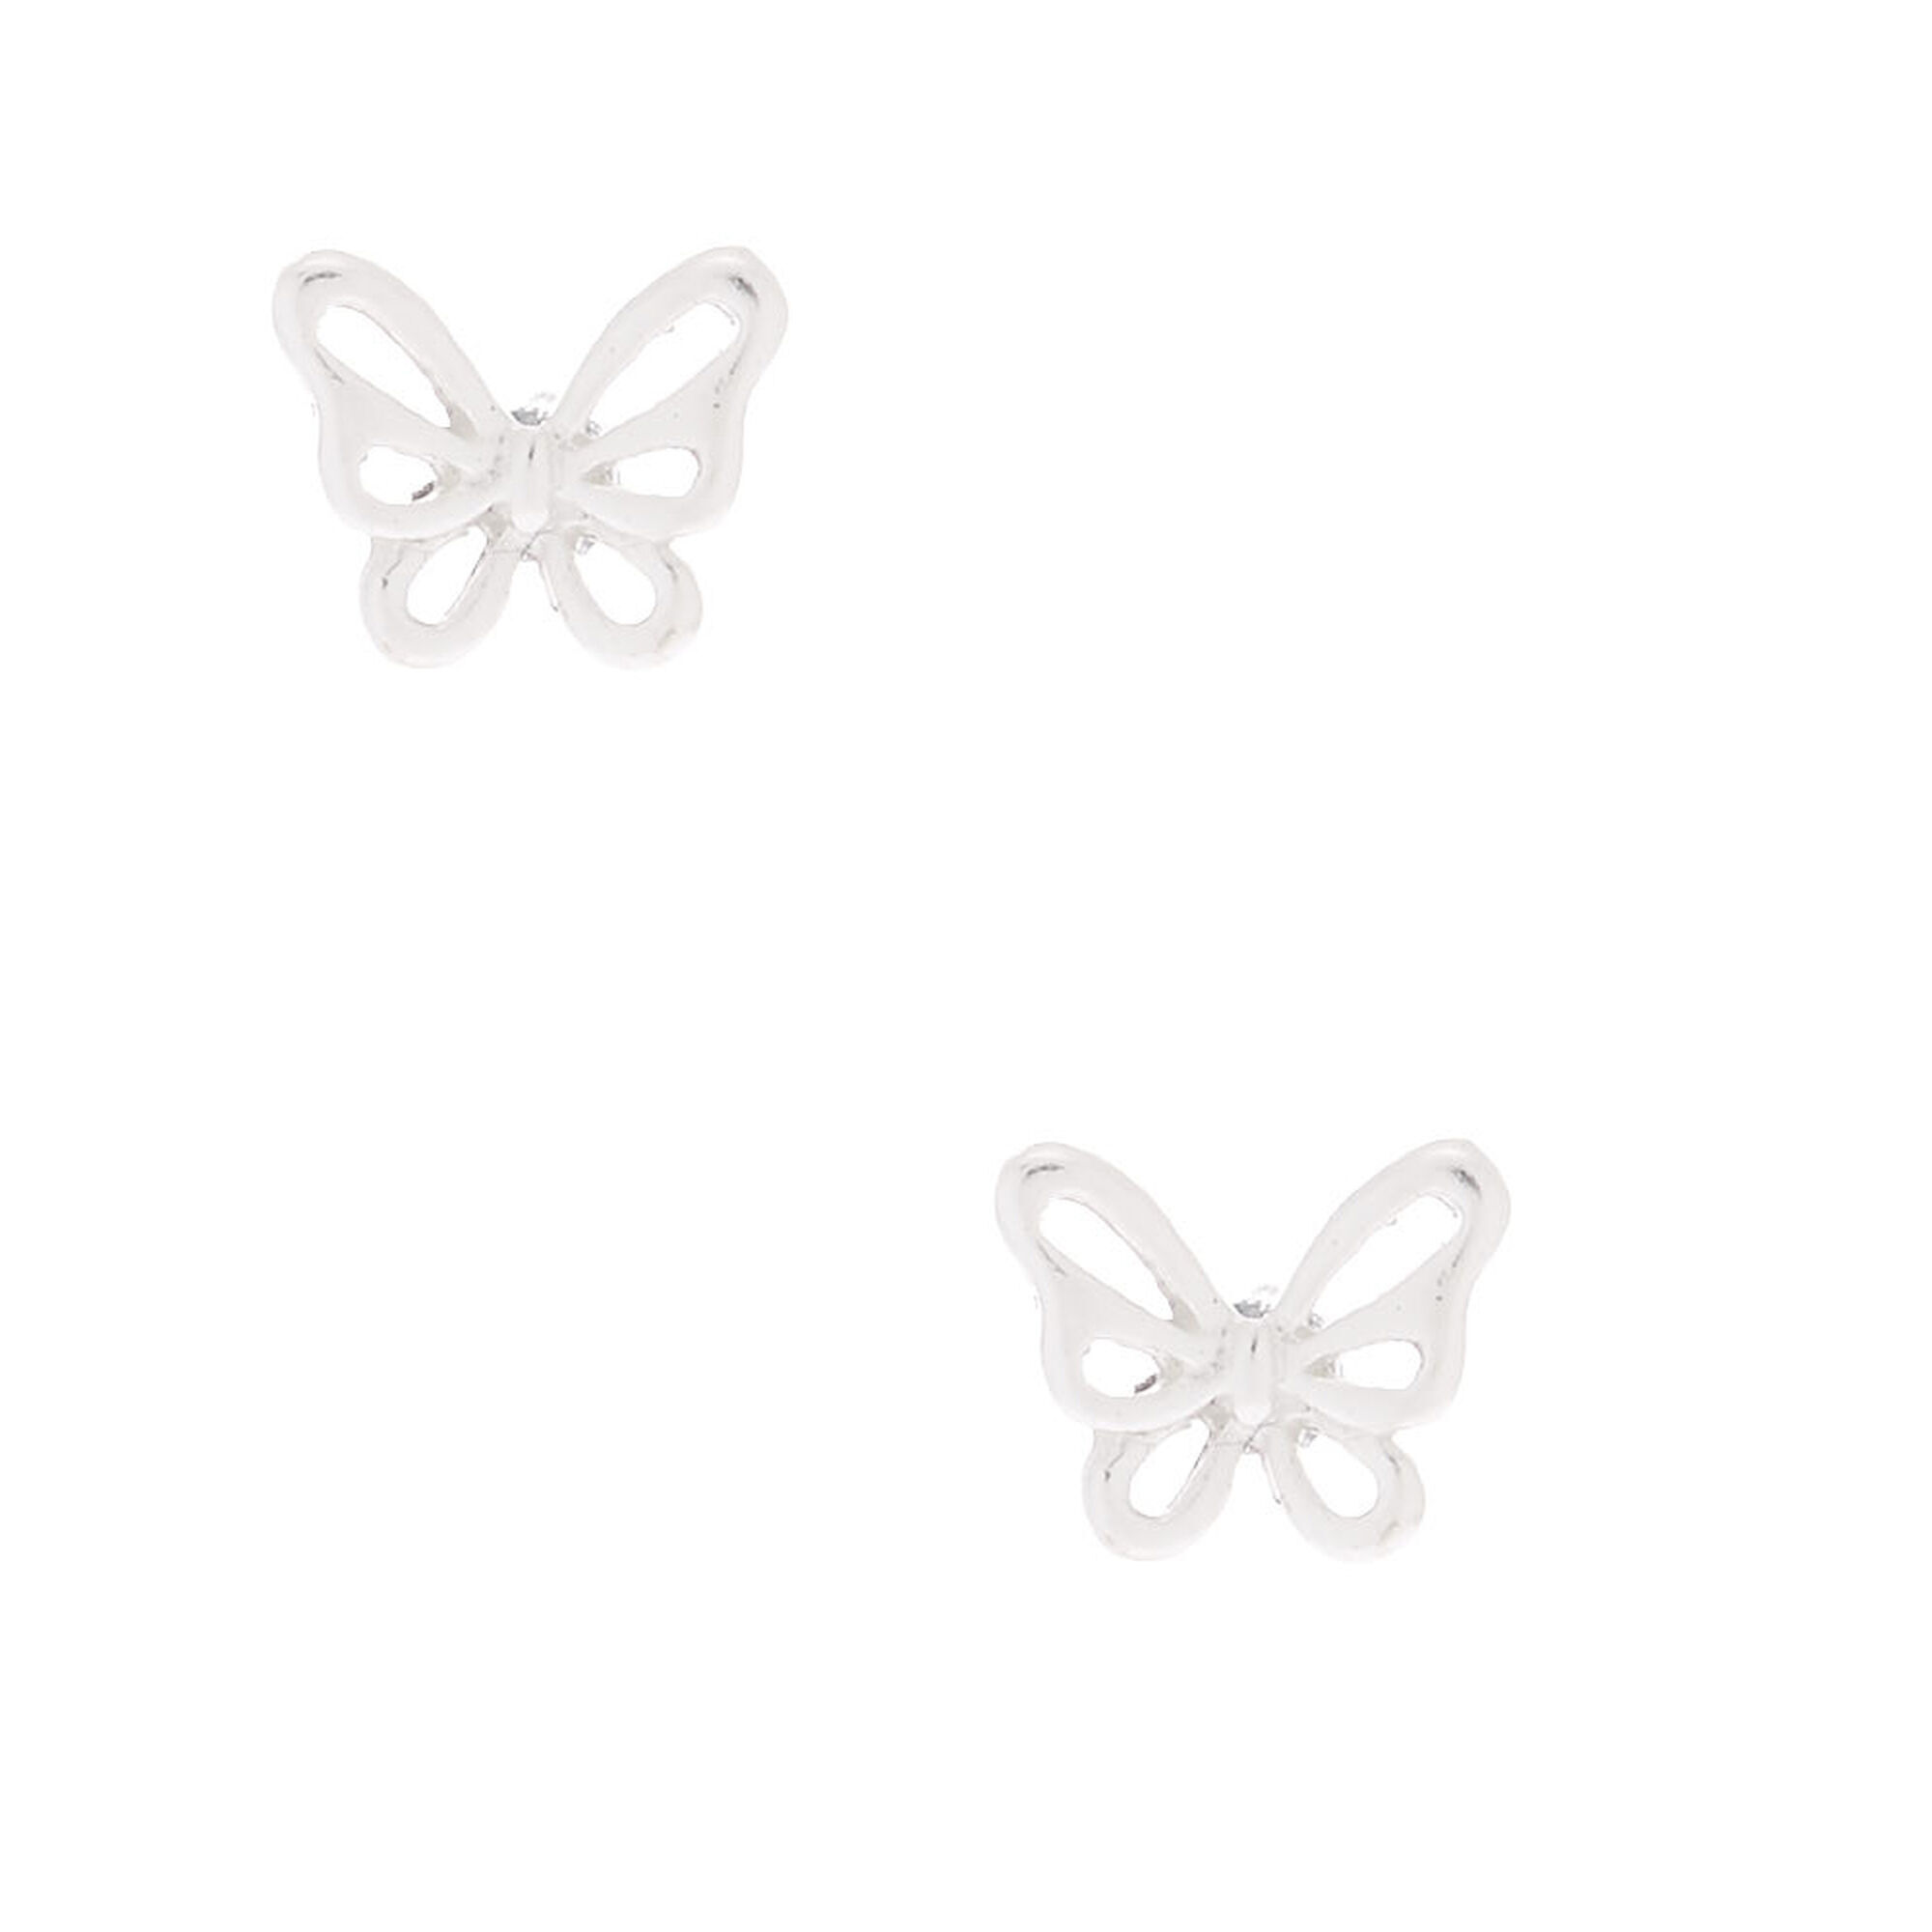 Flat butterfly earrings and pendant set made in pure silver